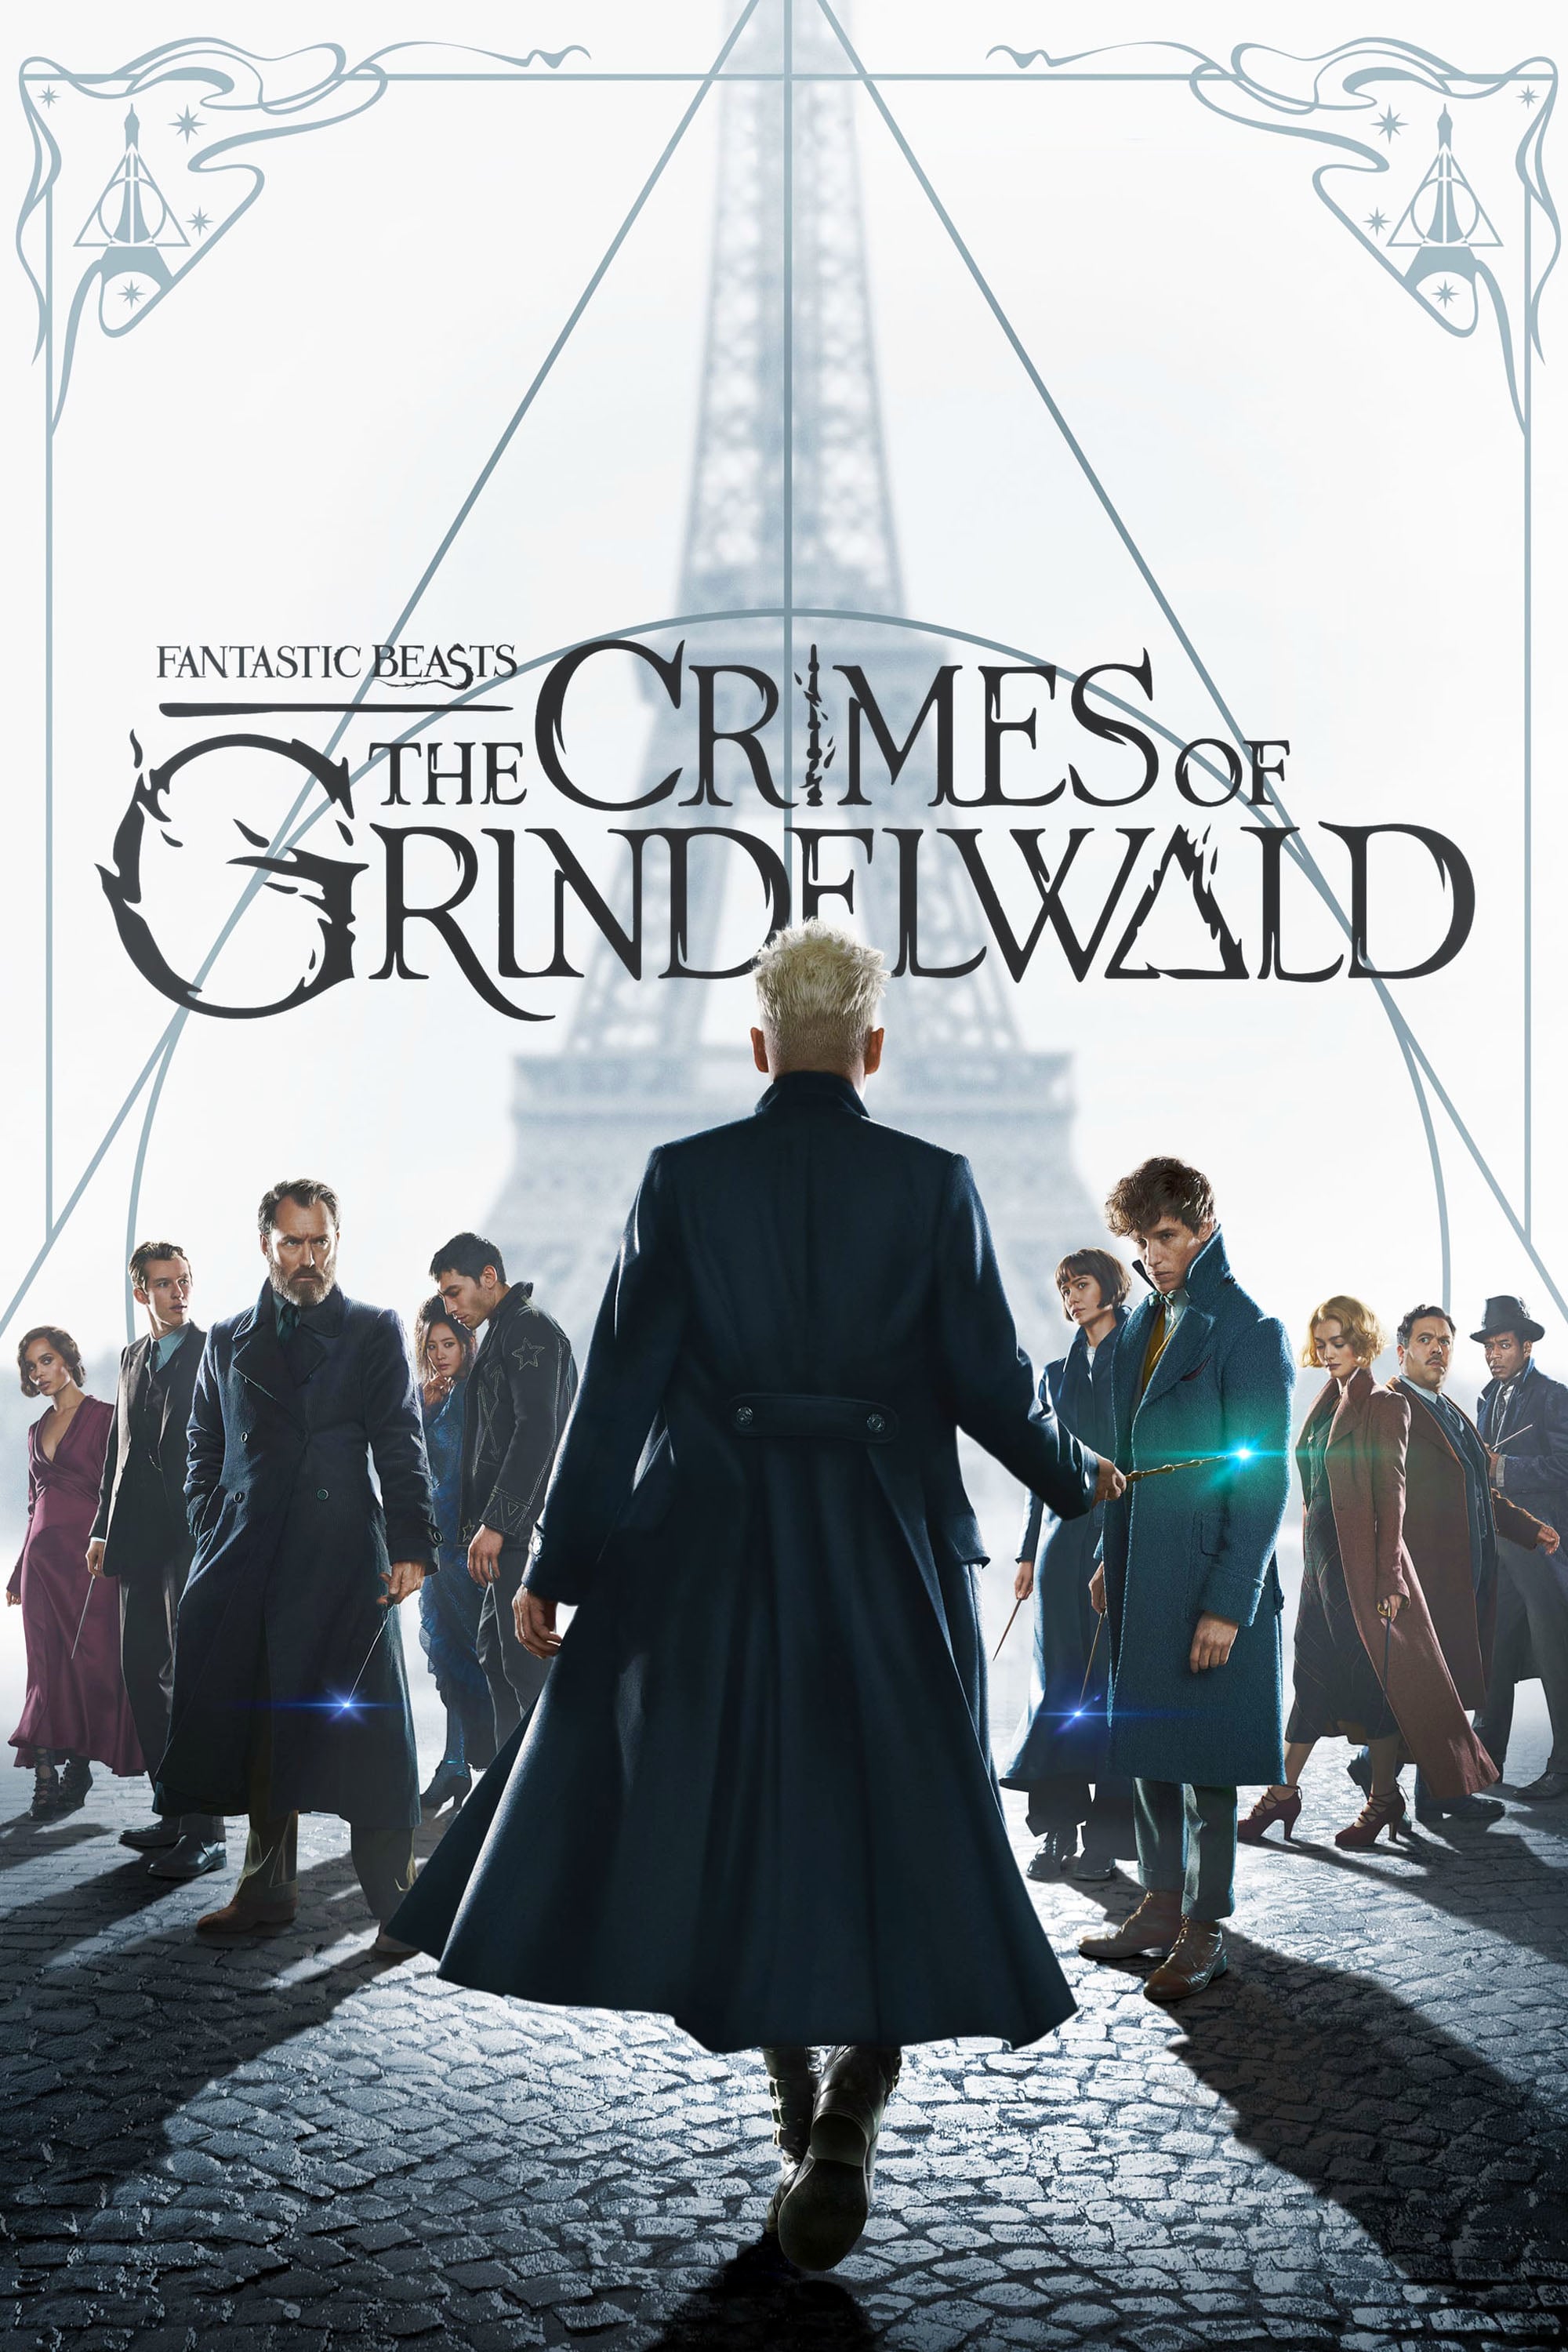 Poster for the movie "Fantastic Beasts: The Crimes of Grindelwald"